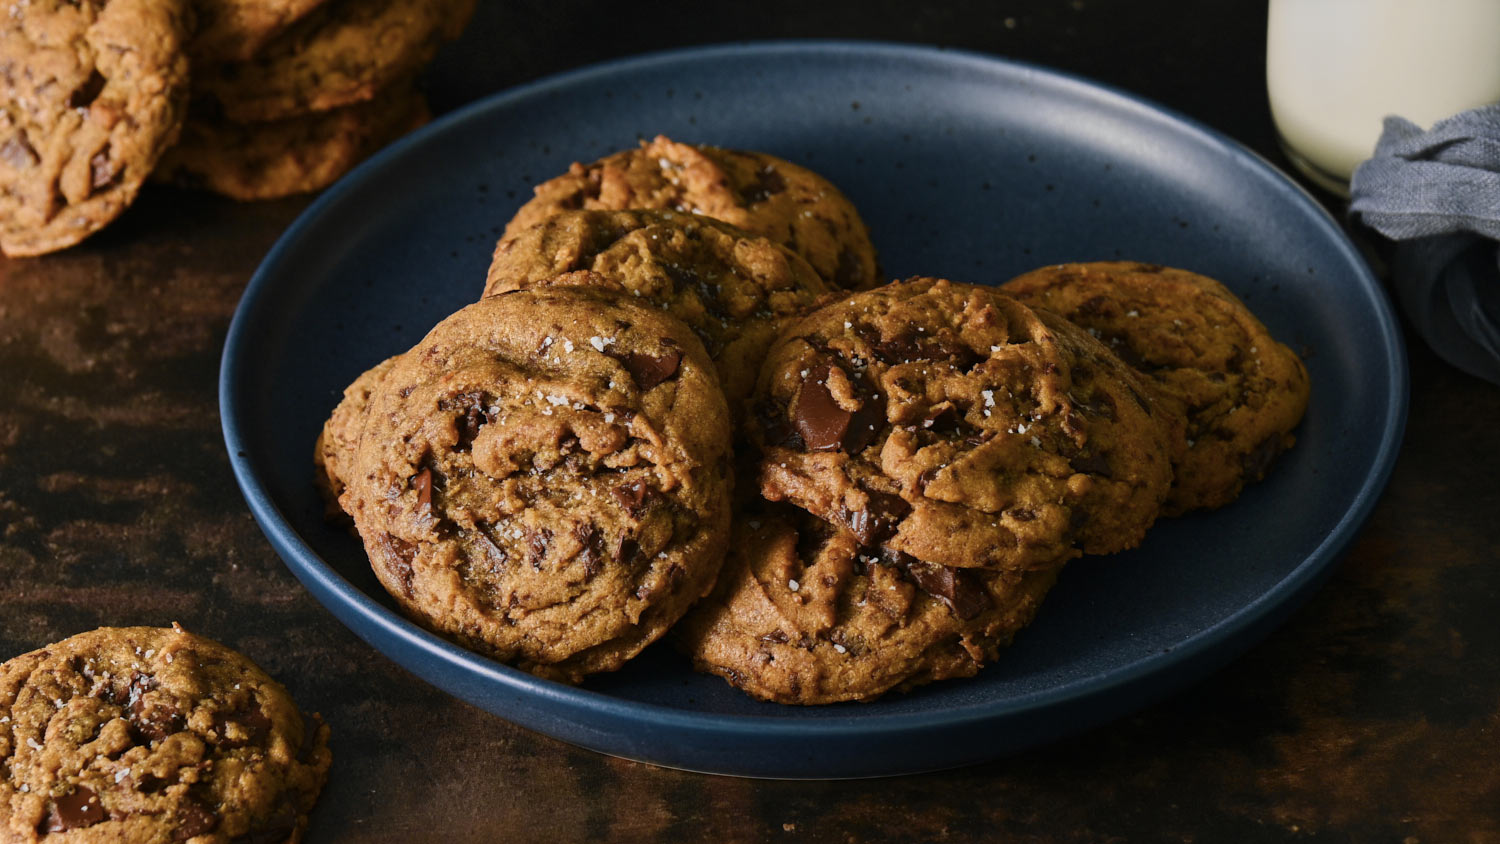 The Best Chocolate Chip Cookies Use Toasted Milk Powder - A Little Spoon